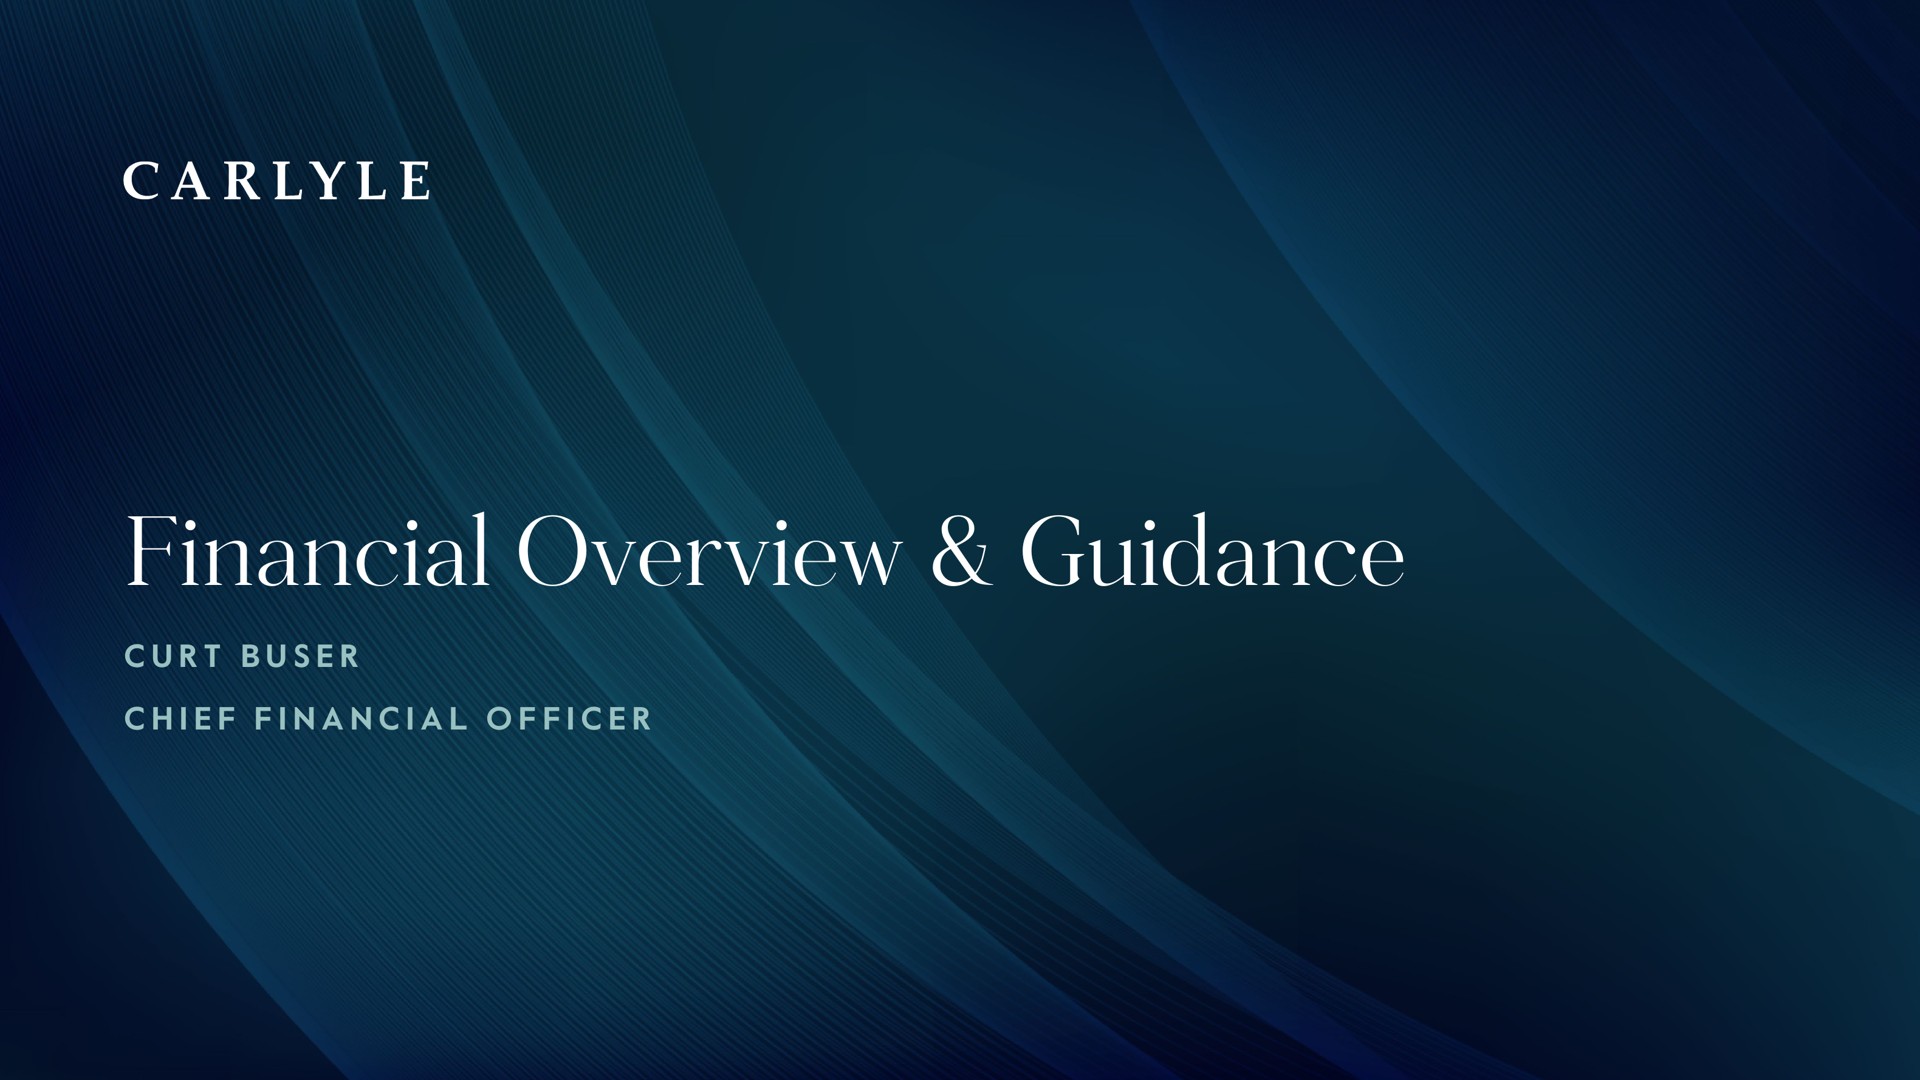 financial overview guidance | Carlyle